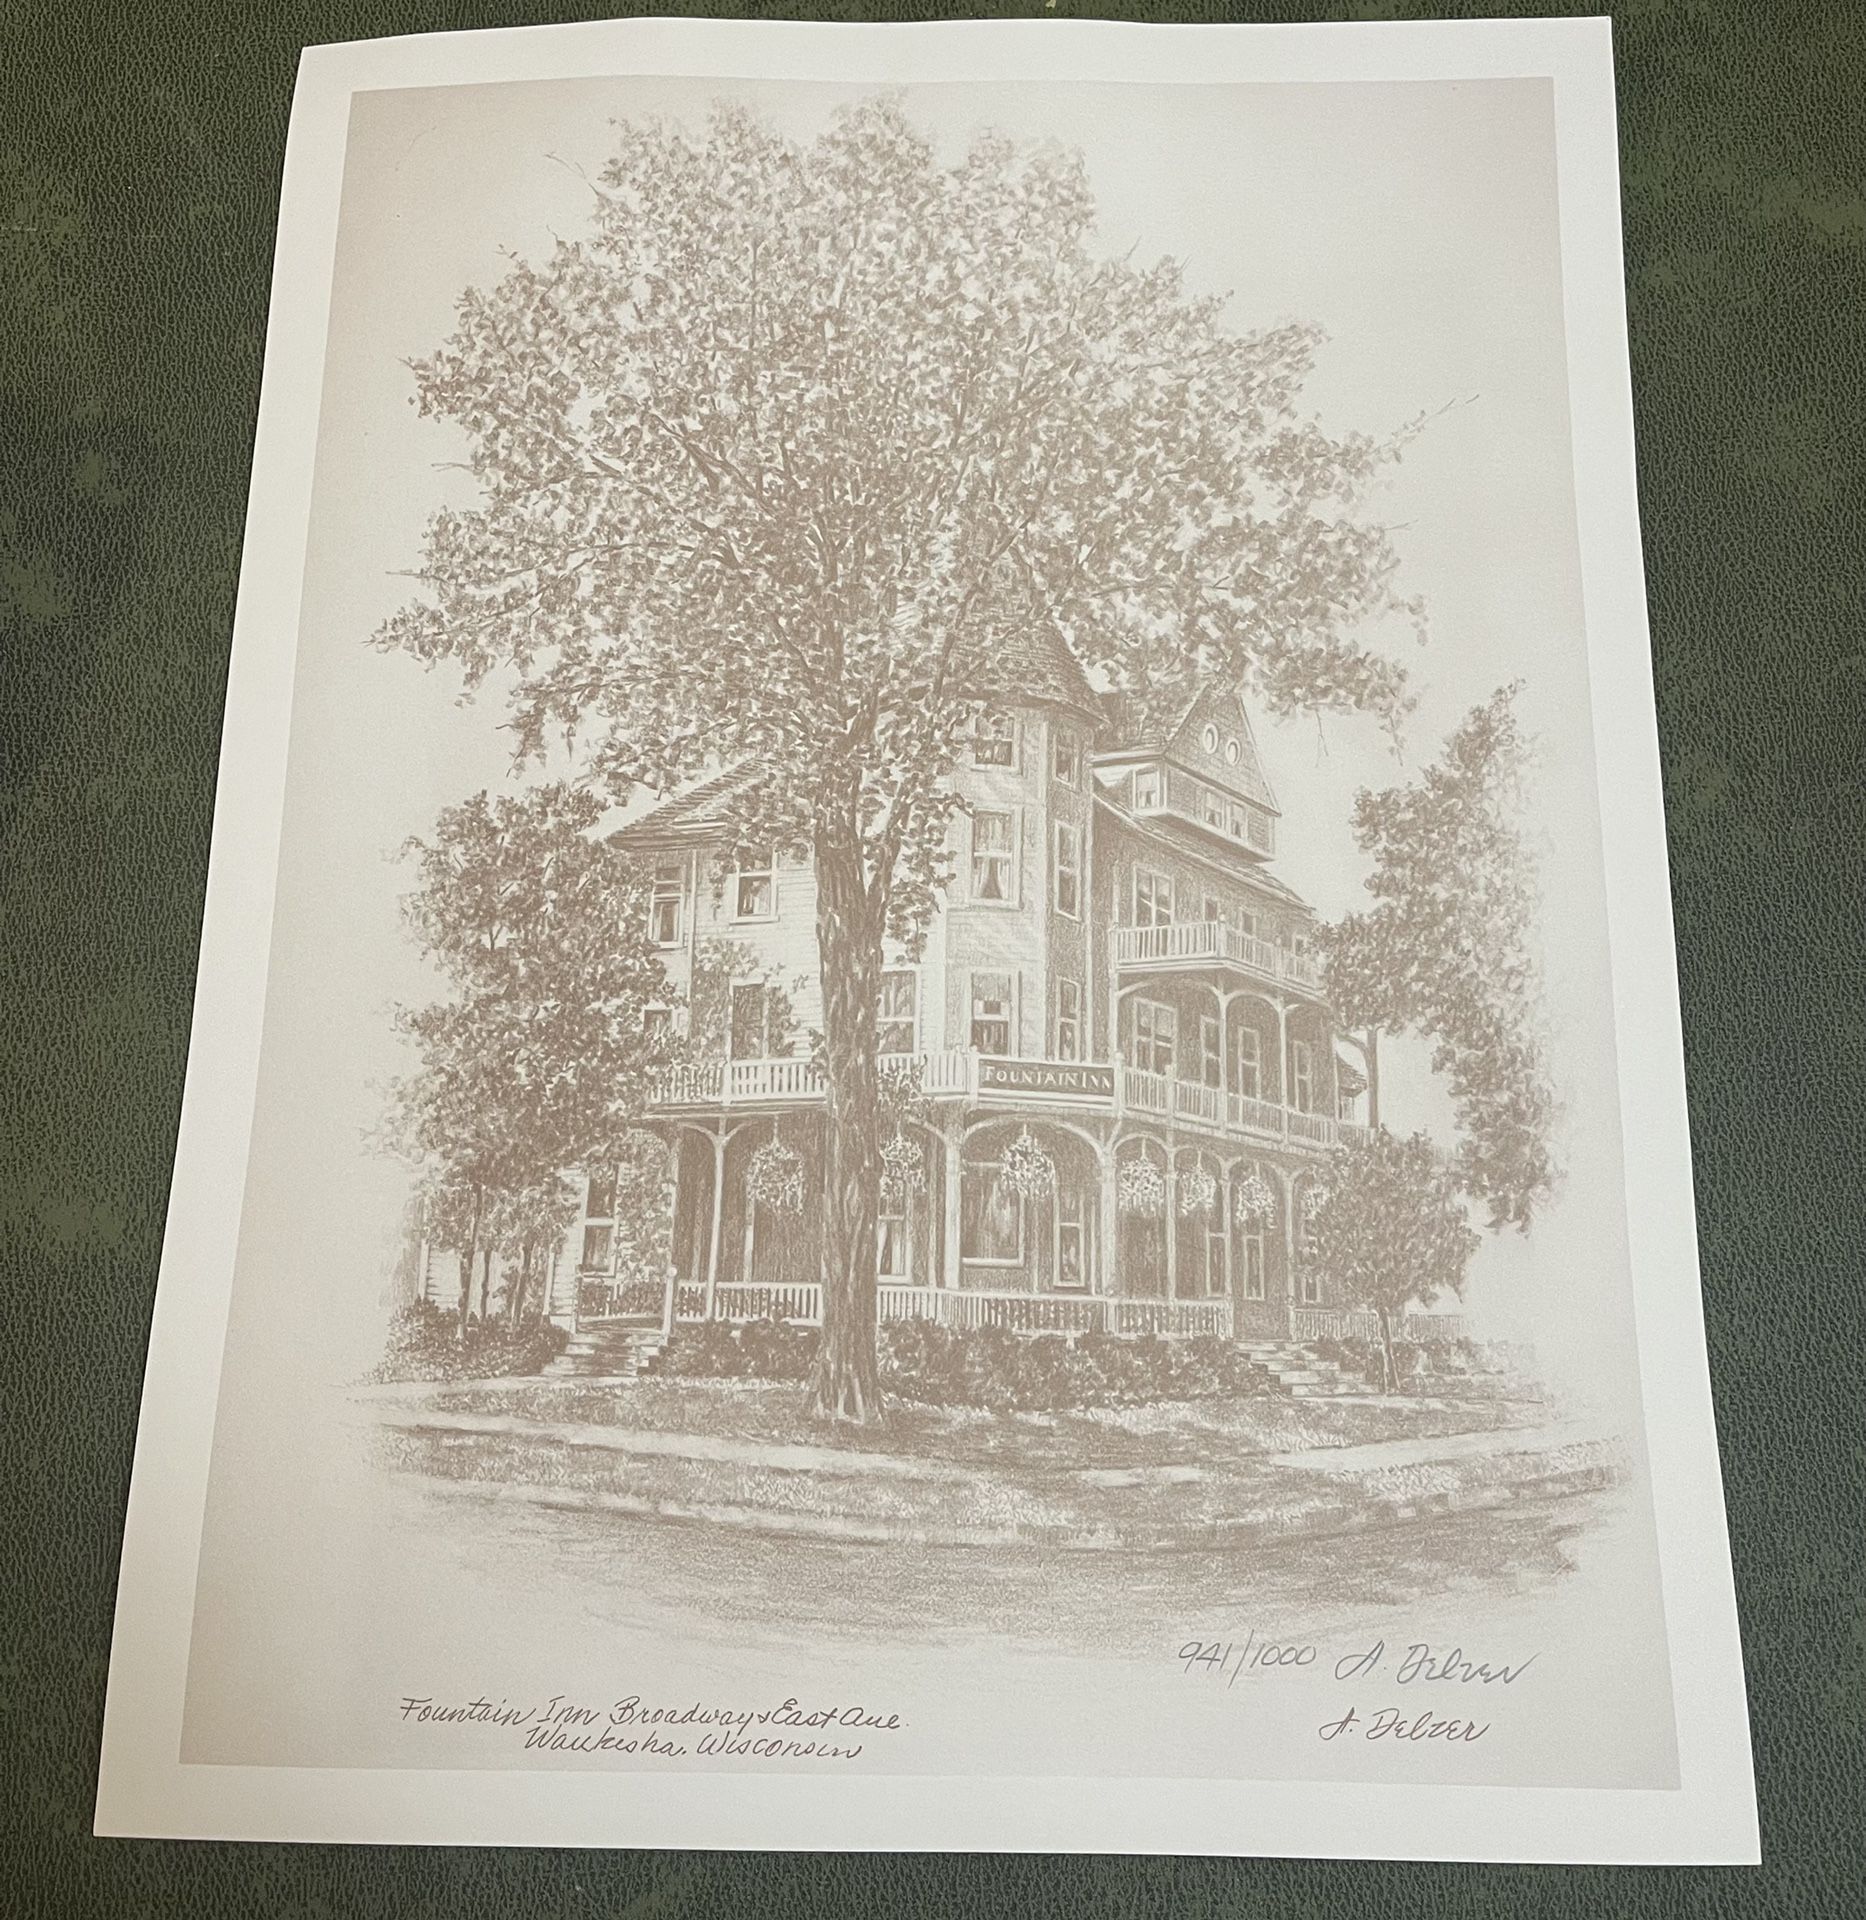 Lot of 5 Lithographs of Old Waukesha by Hans Delzer Signed & # to 1000 14”x11”